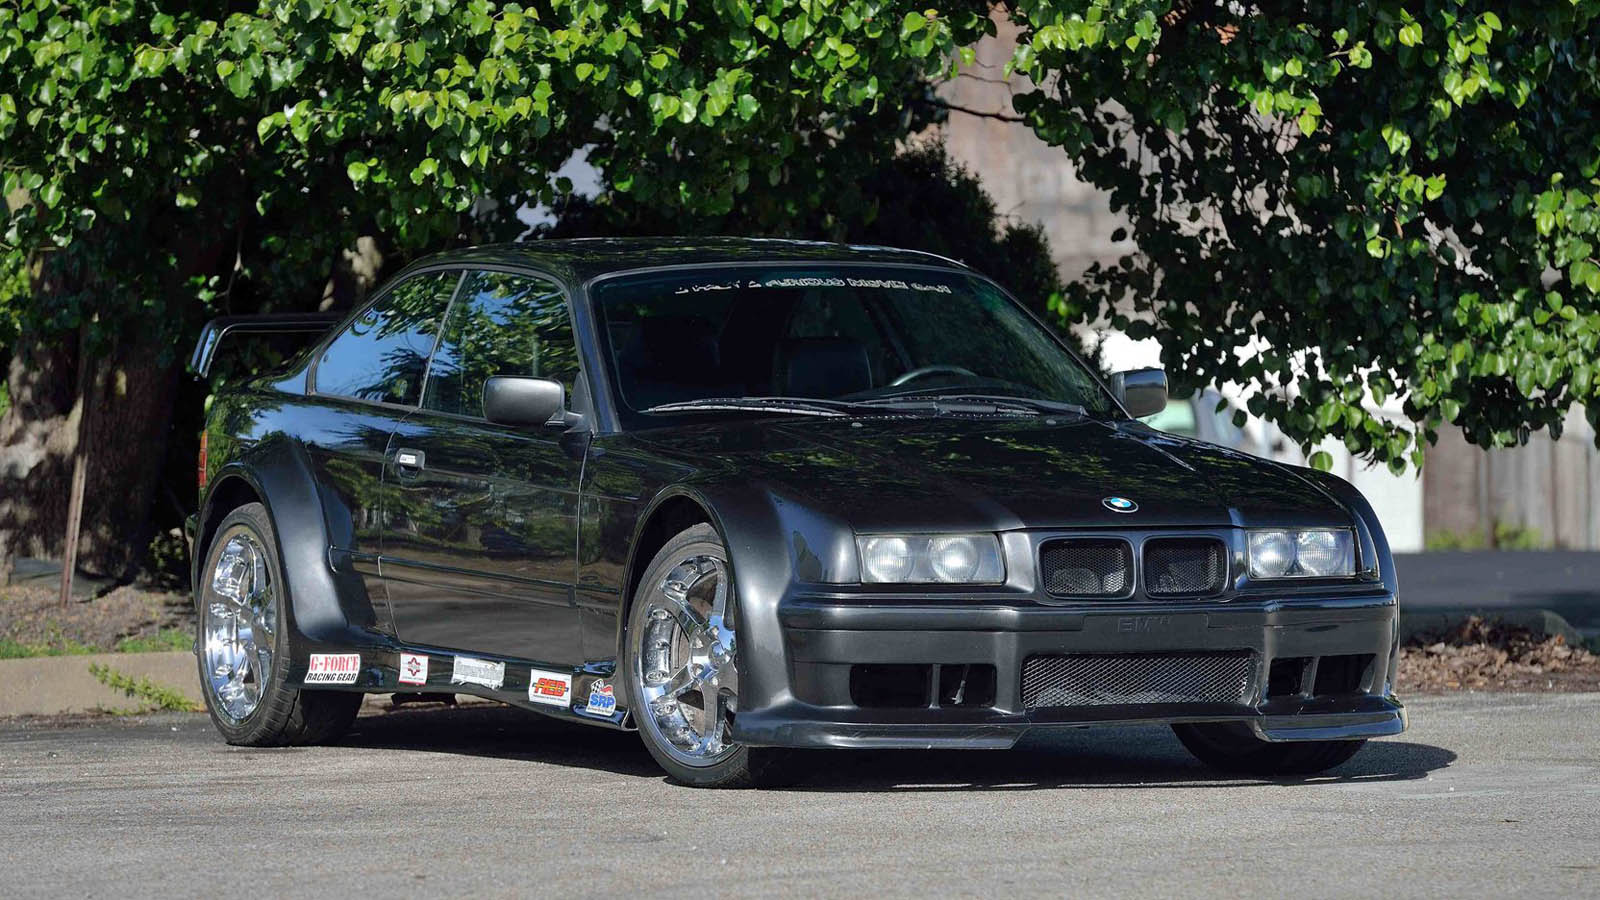 Nobody Wanted The BMW 323iS From 2 Fast 2 Furious Enough To Buy It | Carscoops1600 x 900